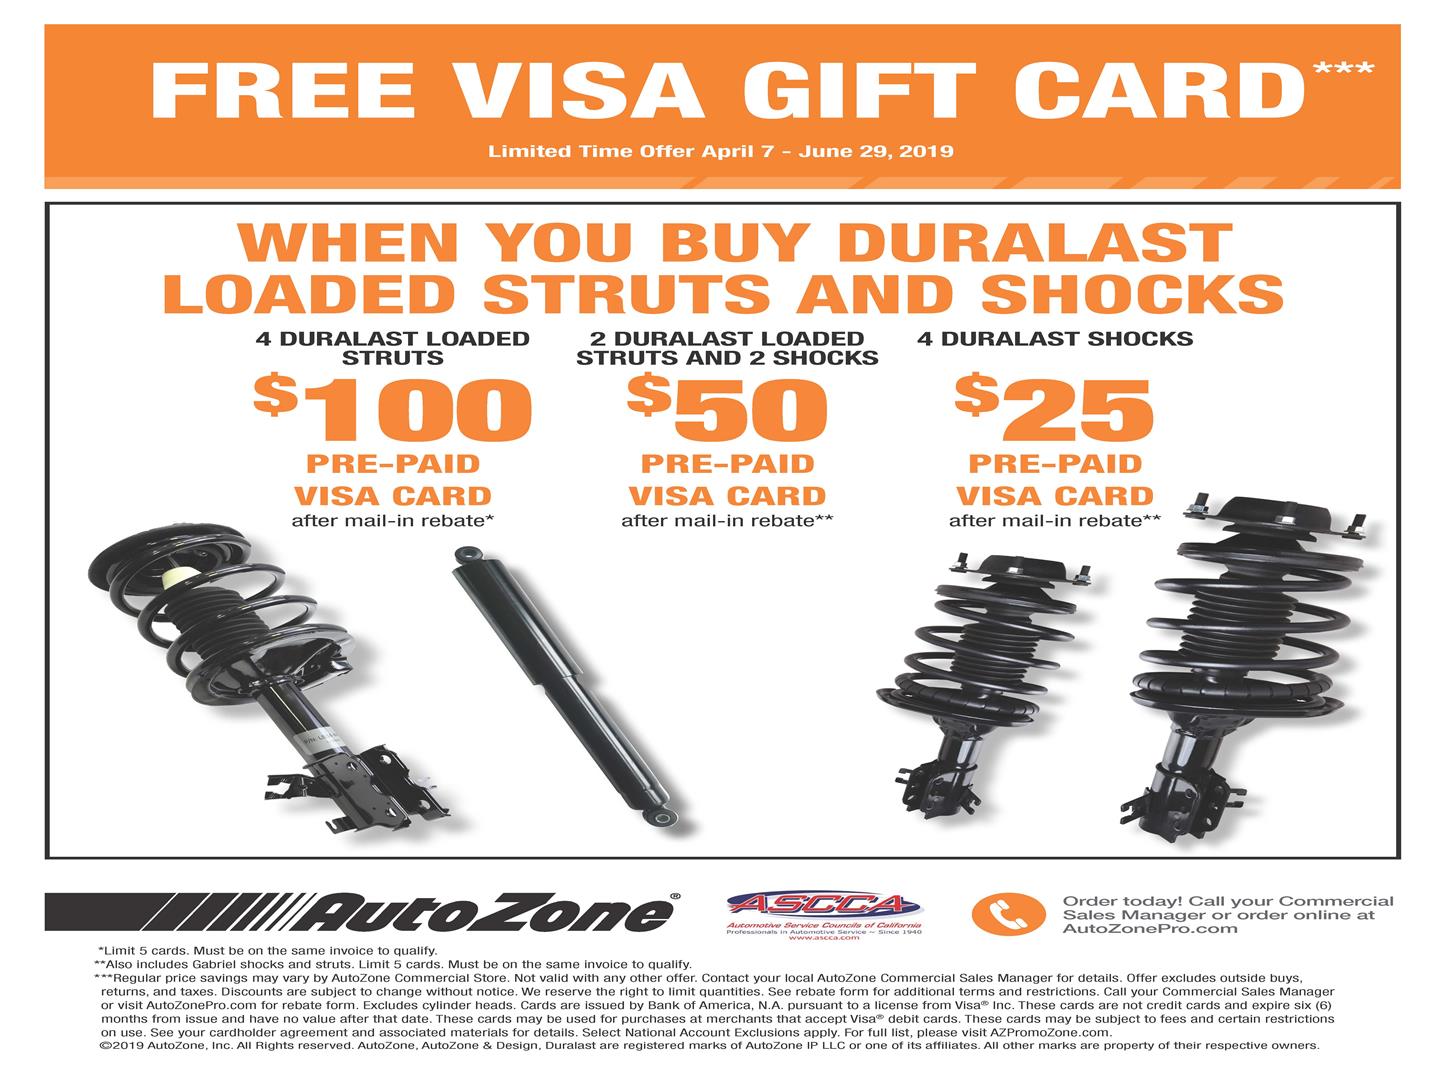 Autozone Free Visa Gift Card When You Buy Duralast Loaded Struts and Shocks